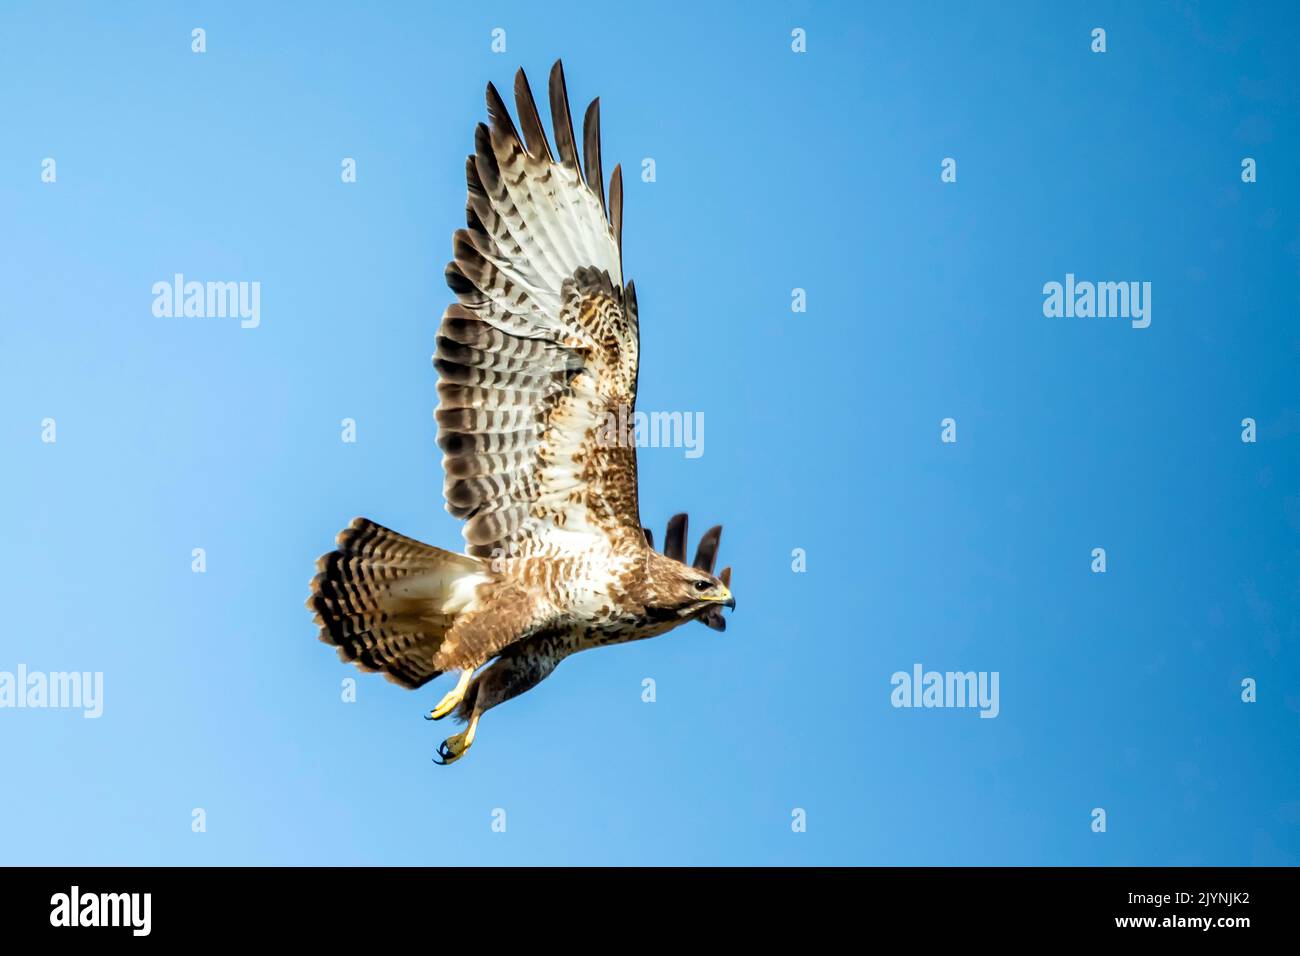 Common Buzzard (Buteo buteo) in flight against a blue winter sky, clearing at the edge of a forest near Toul, Lorraine, France Stock Photo